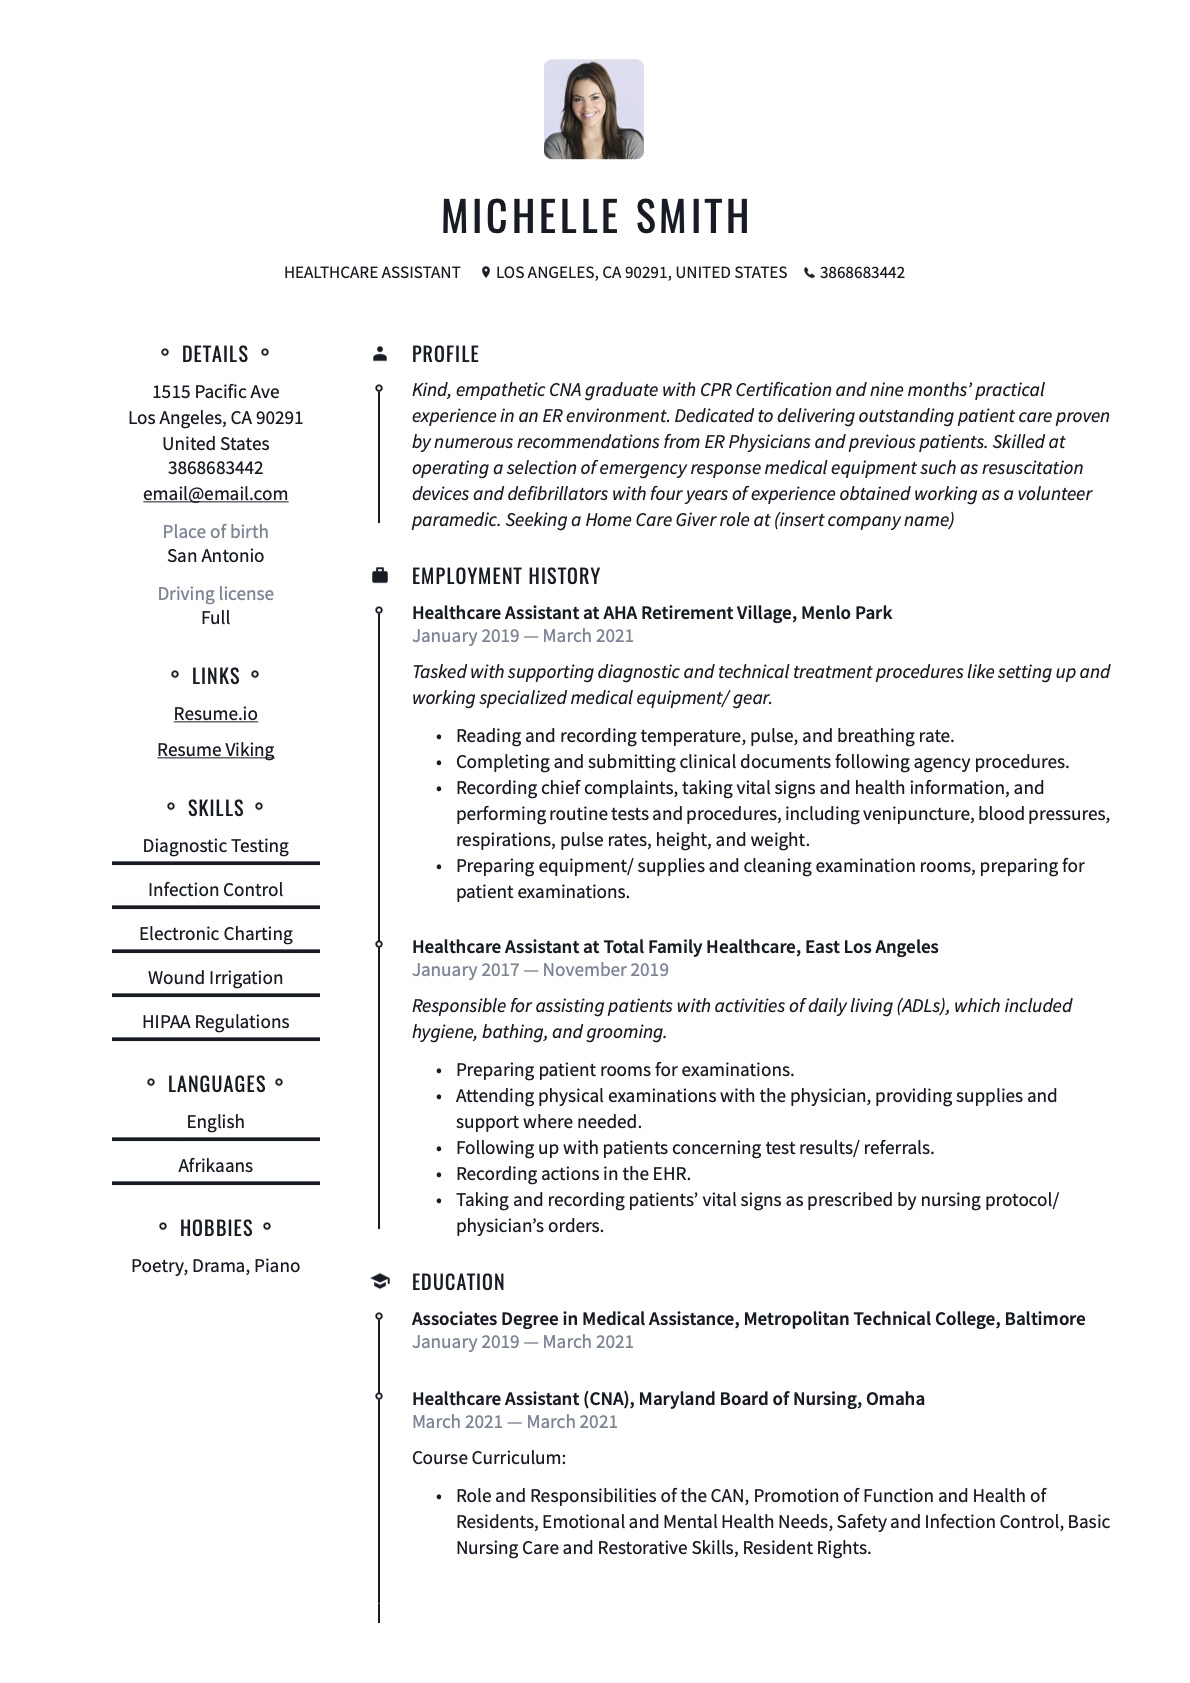 Example Resume Healthcare_Assistant-2